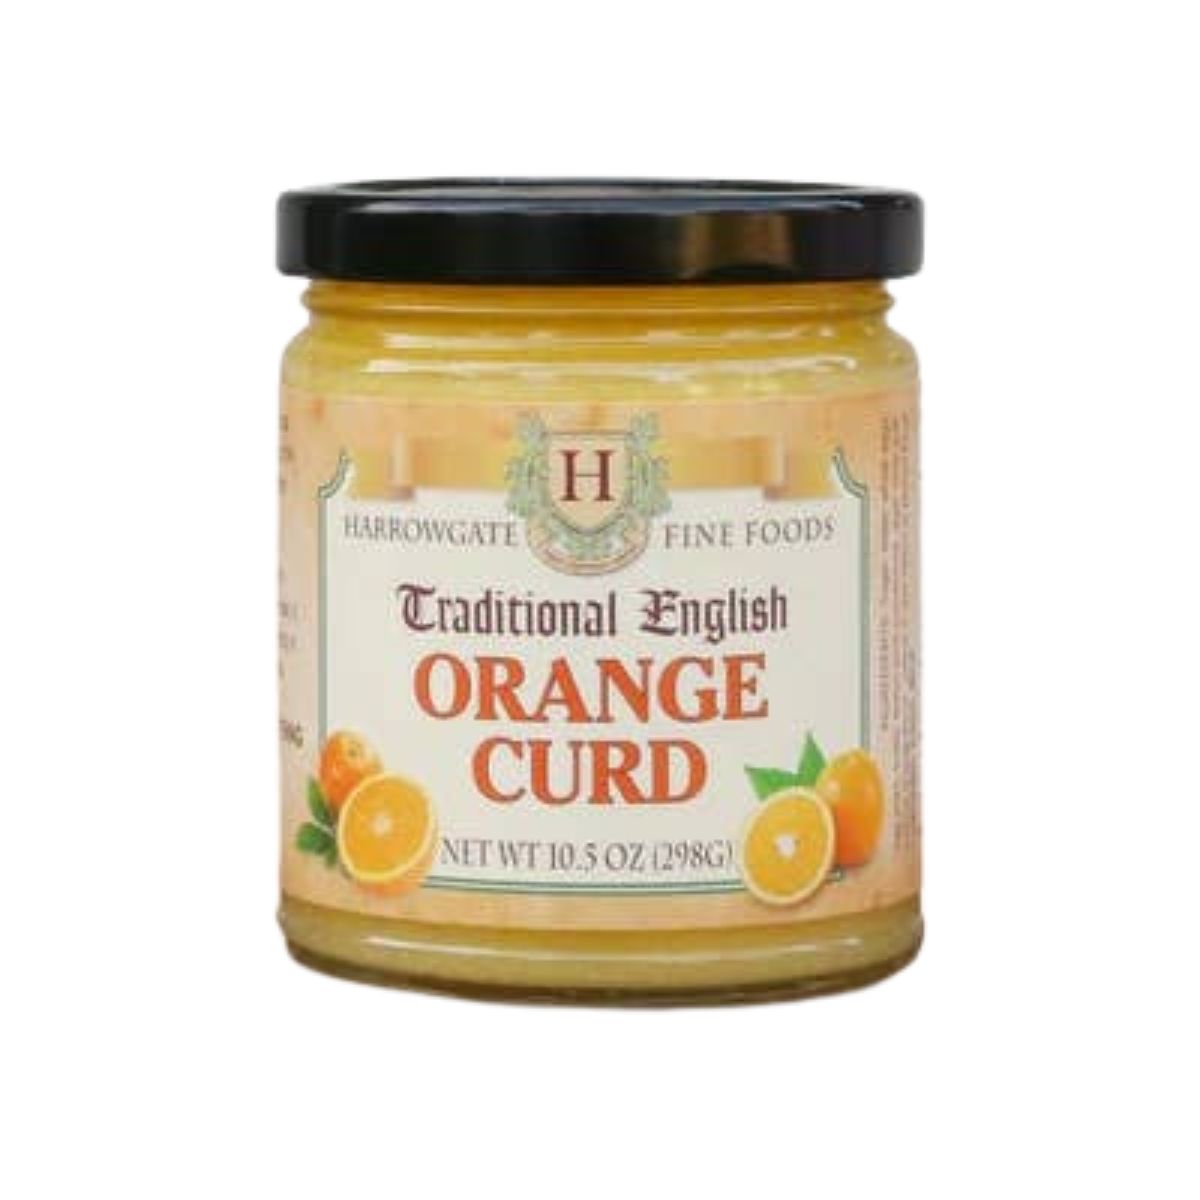 Traditional English Orange Curd- the perfect dessert topping